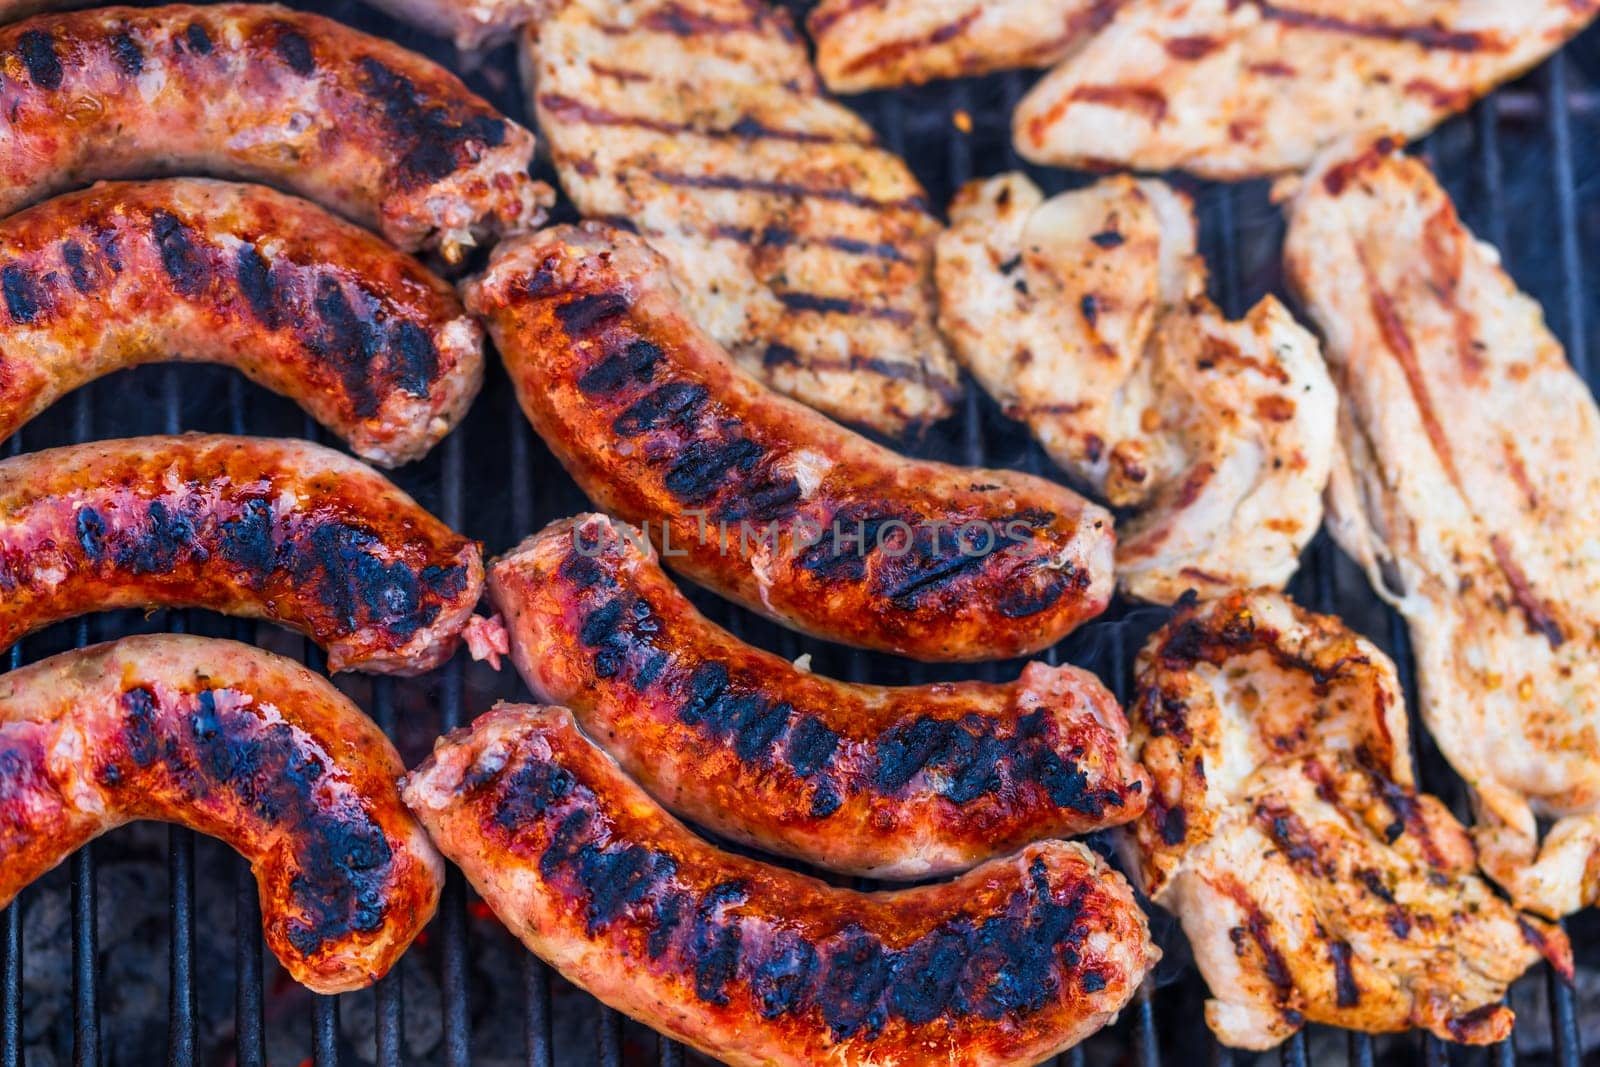 Pork meat and sausages grilled on a charcoal barbeque. Top view of tasty barbecue, food concept, food on grill and detail of food on the grill